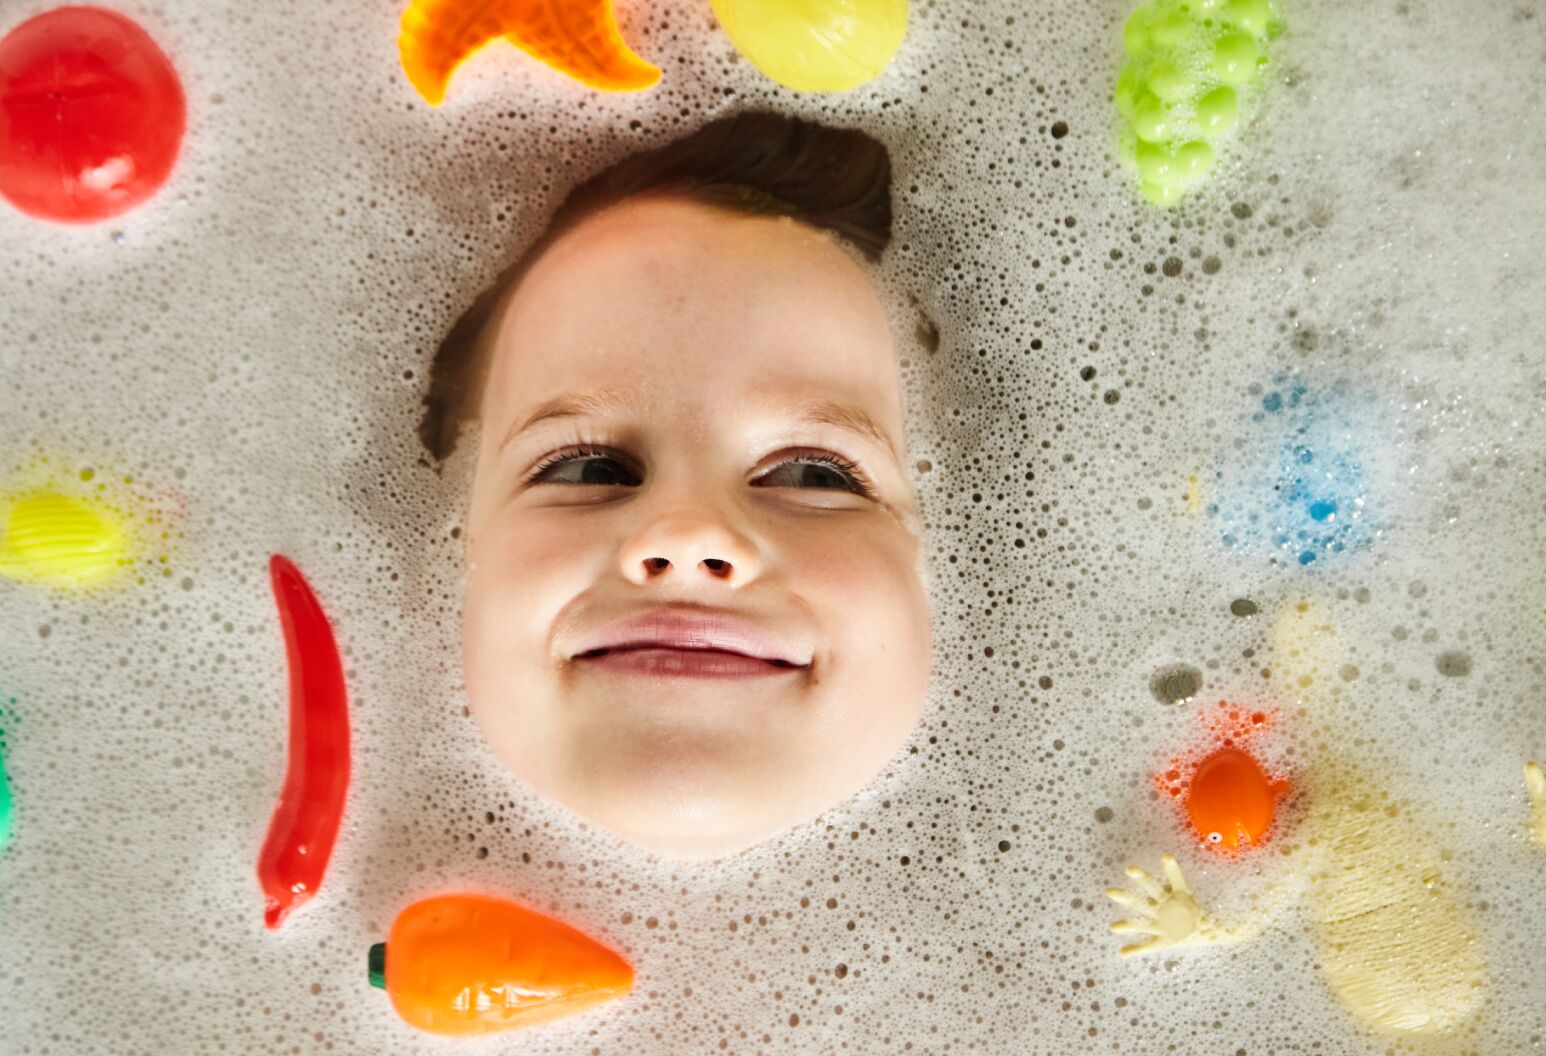 How to Clean Your Child's Moldy Bath Toys